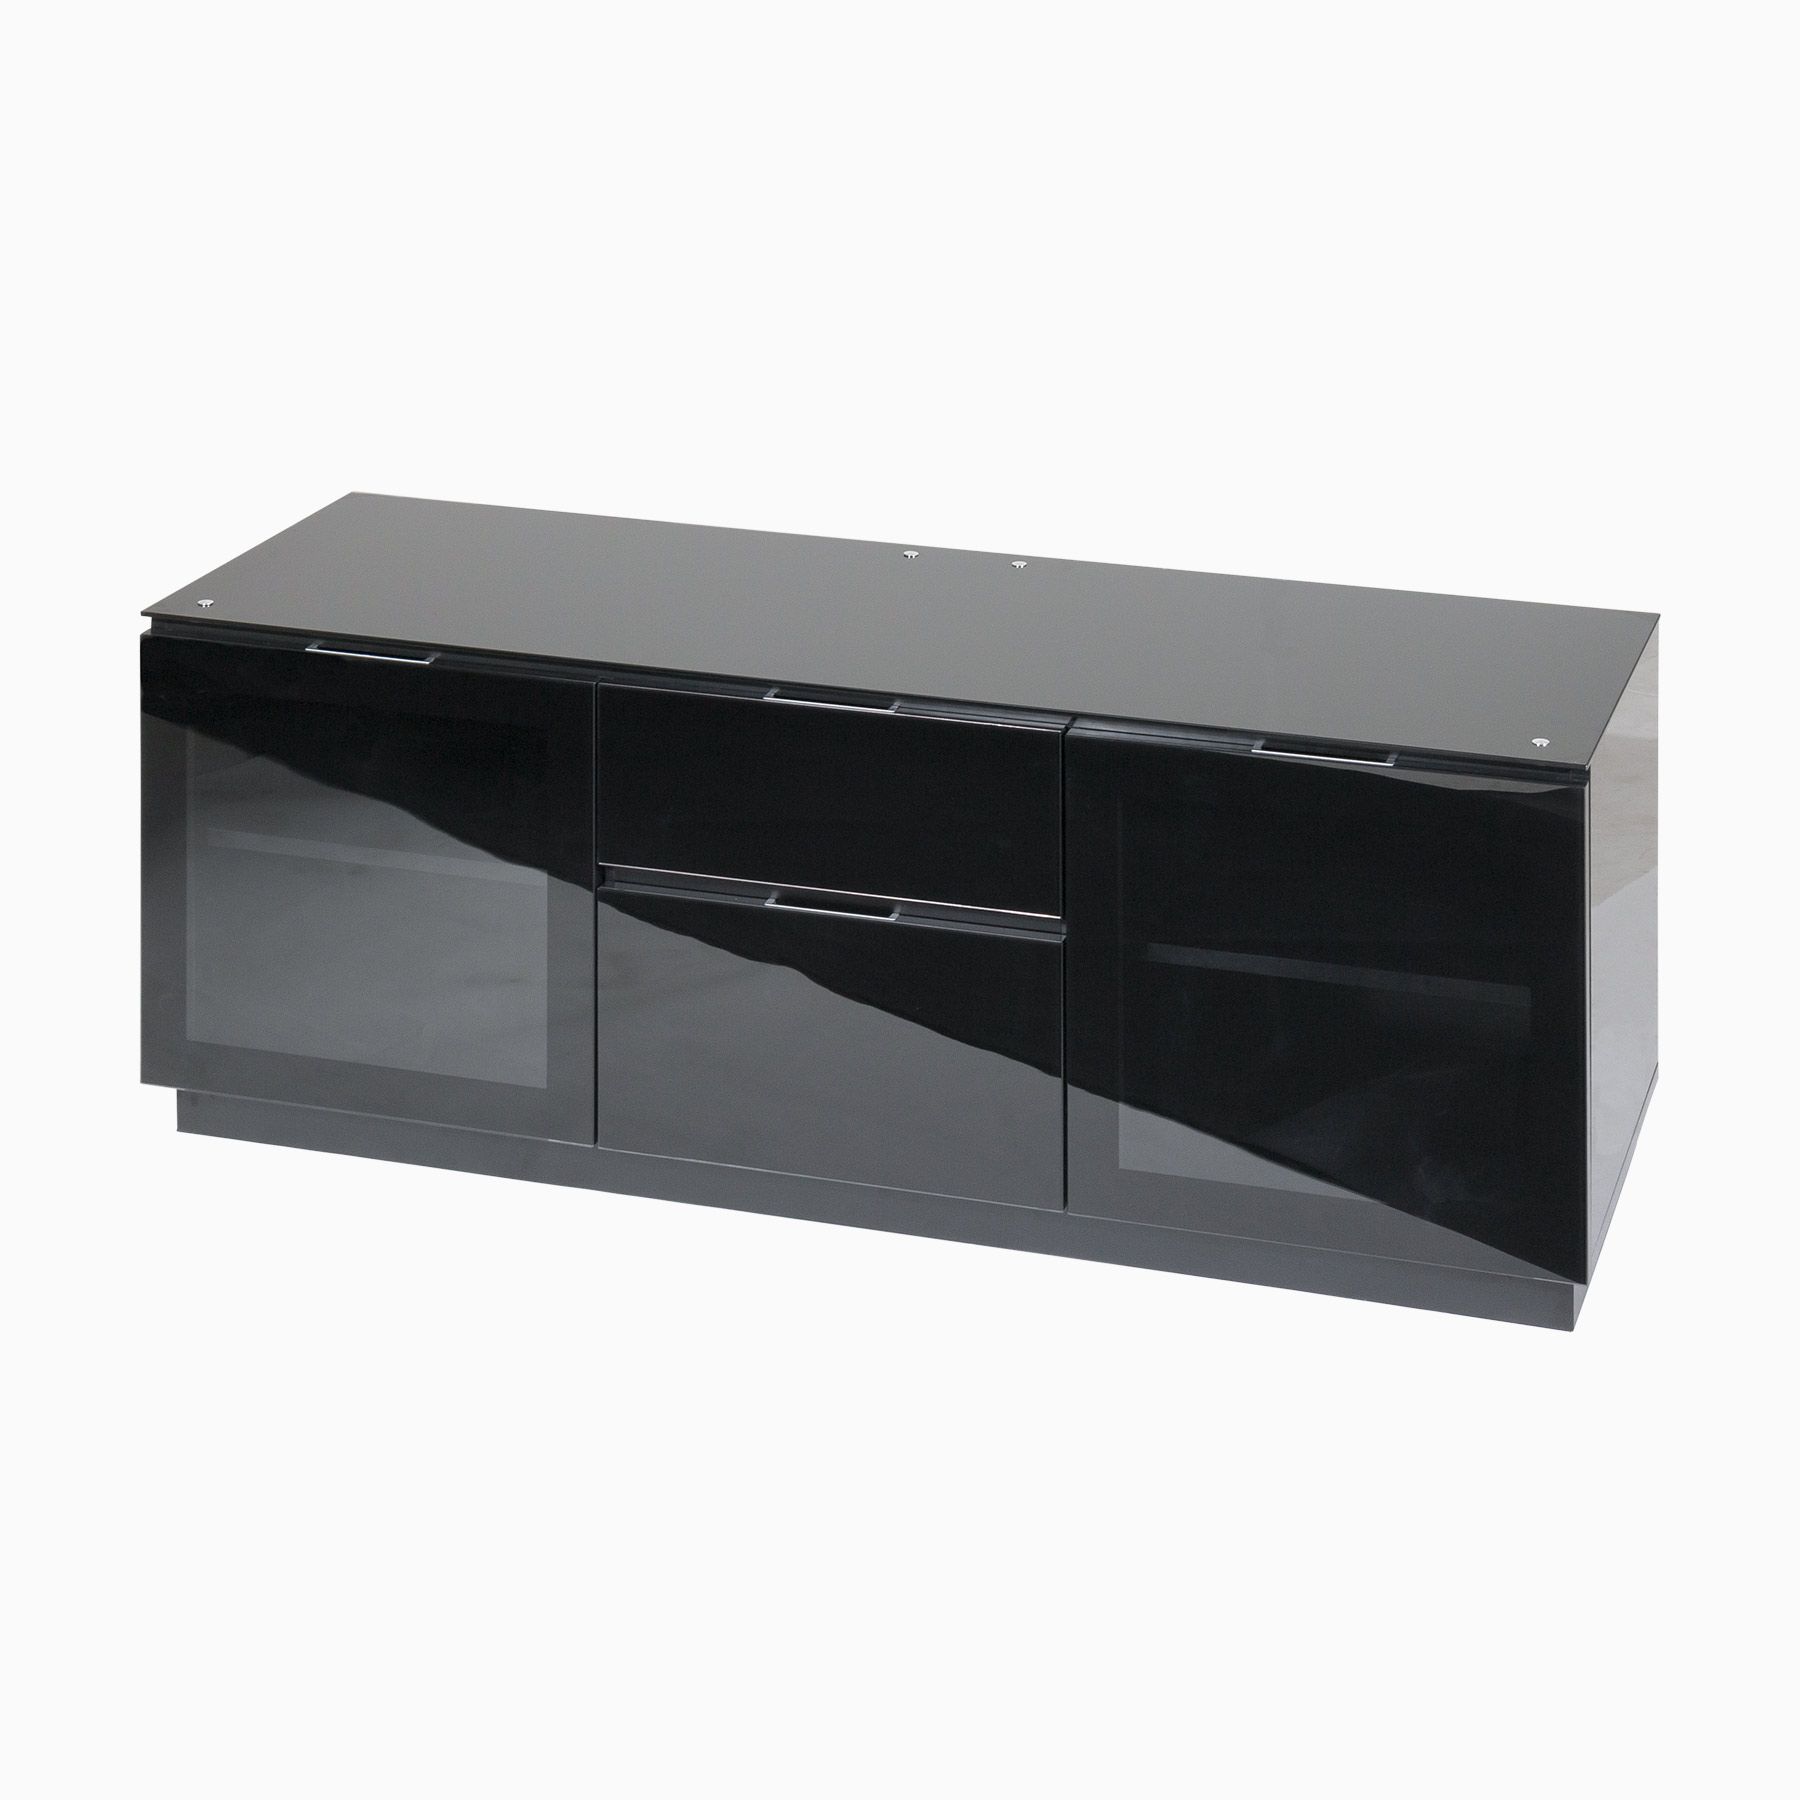 Black Tv Cabinets With Doors Intended For Most Current Tv Cabinet With Doors And Drawers For Up To 65" Screens (View 18 of 20)